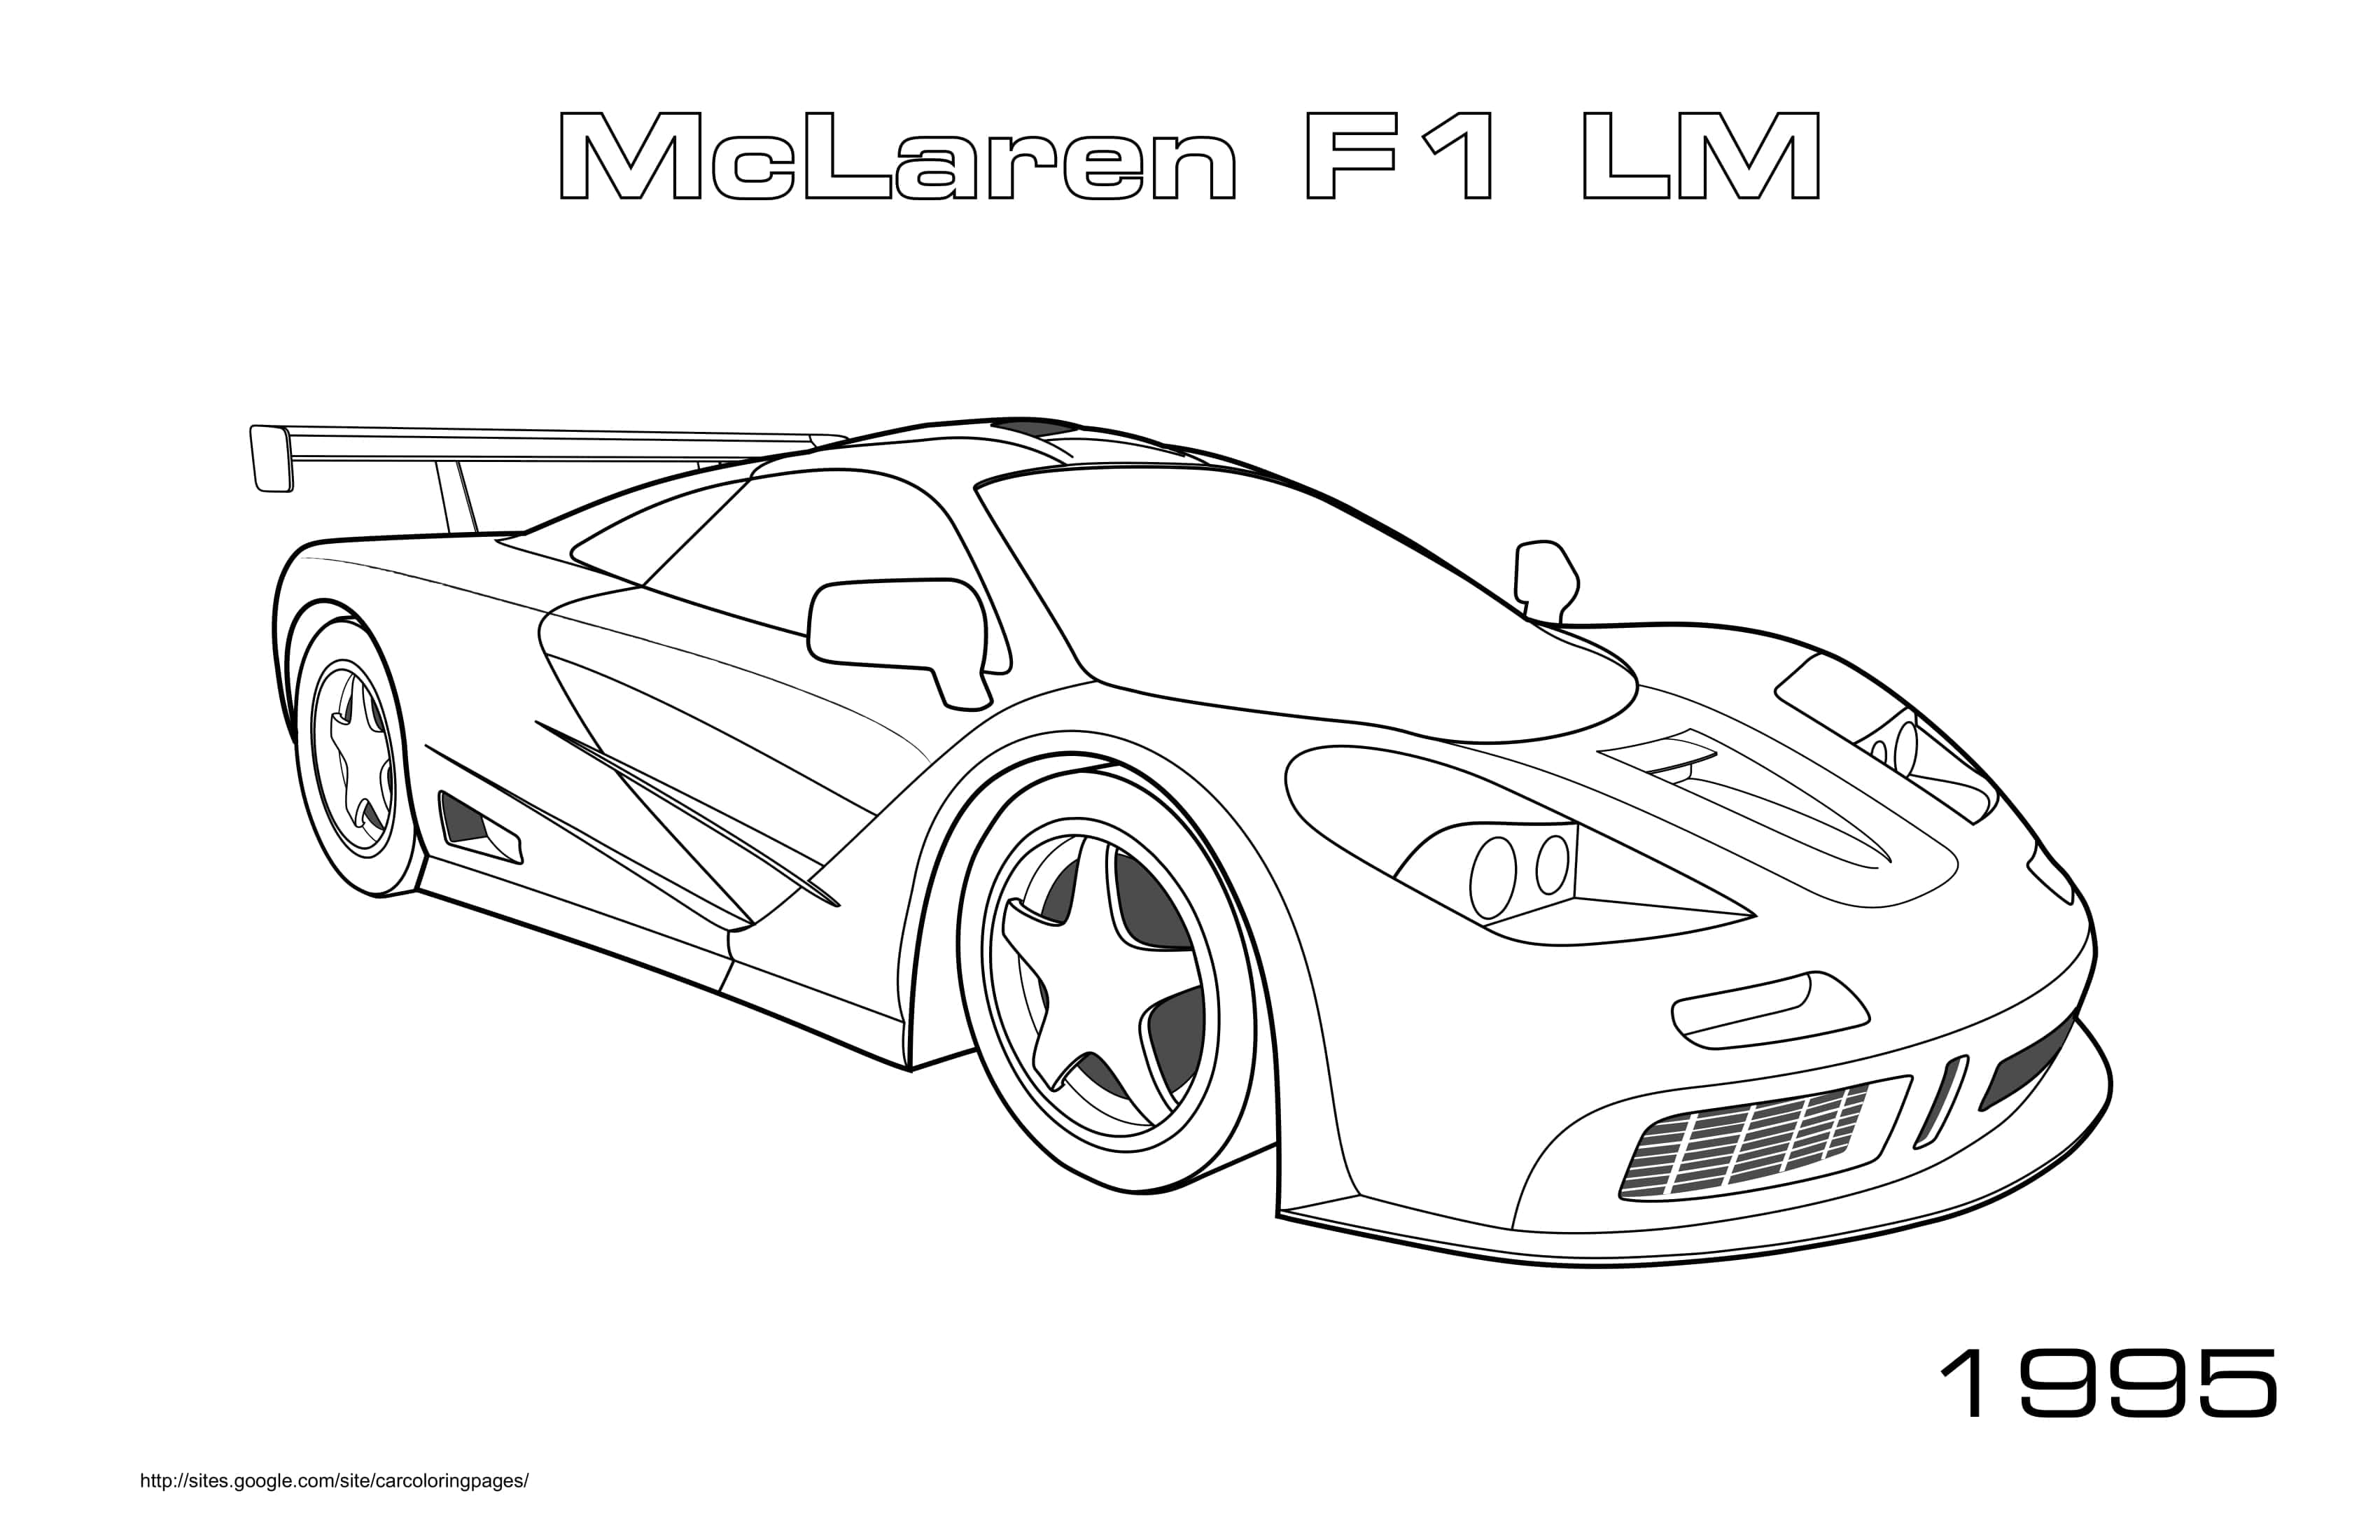 Mclaren F1 Lm 1995 Coloring Page